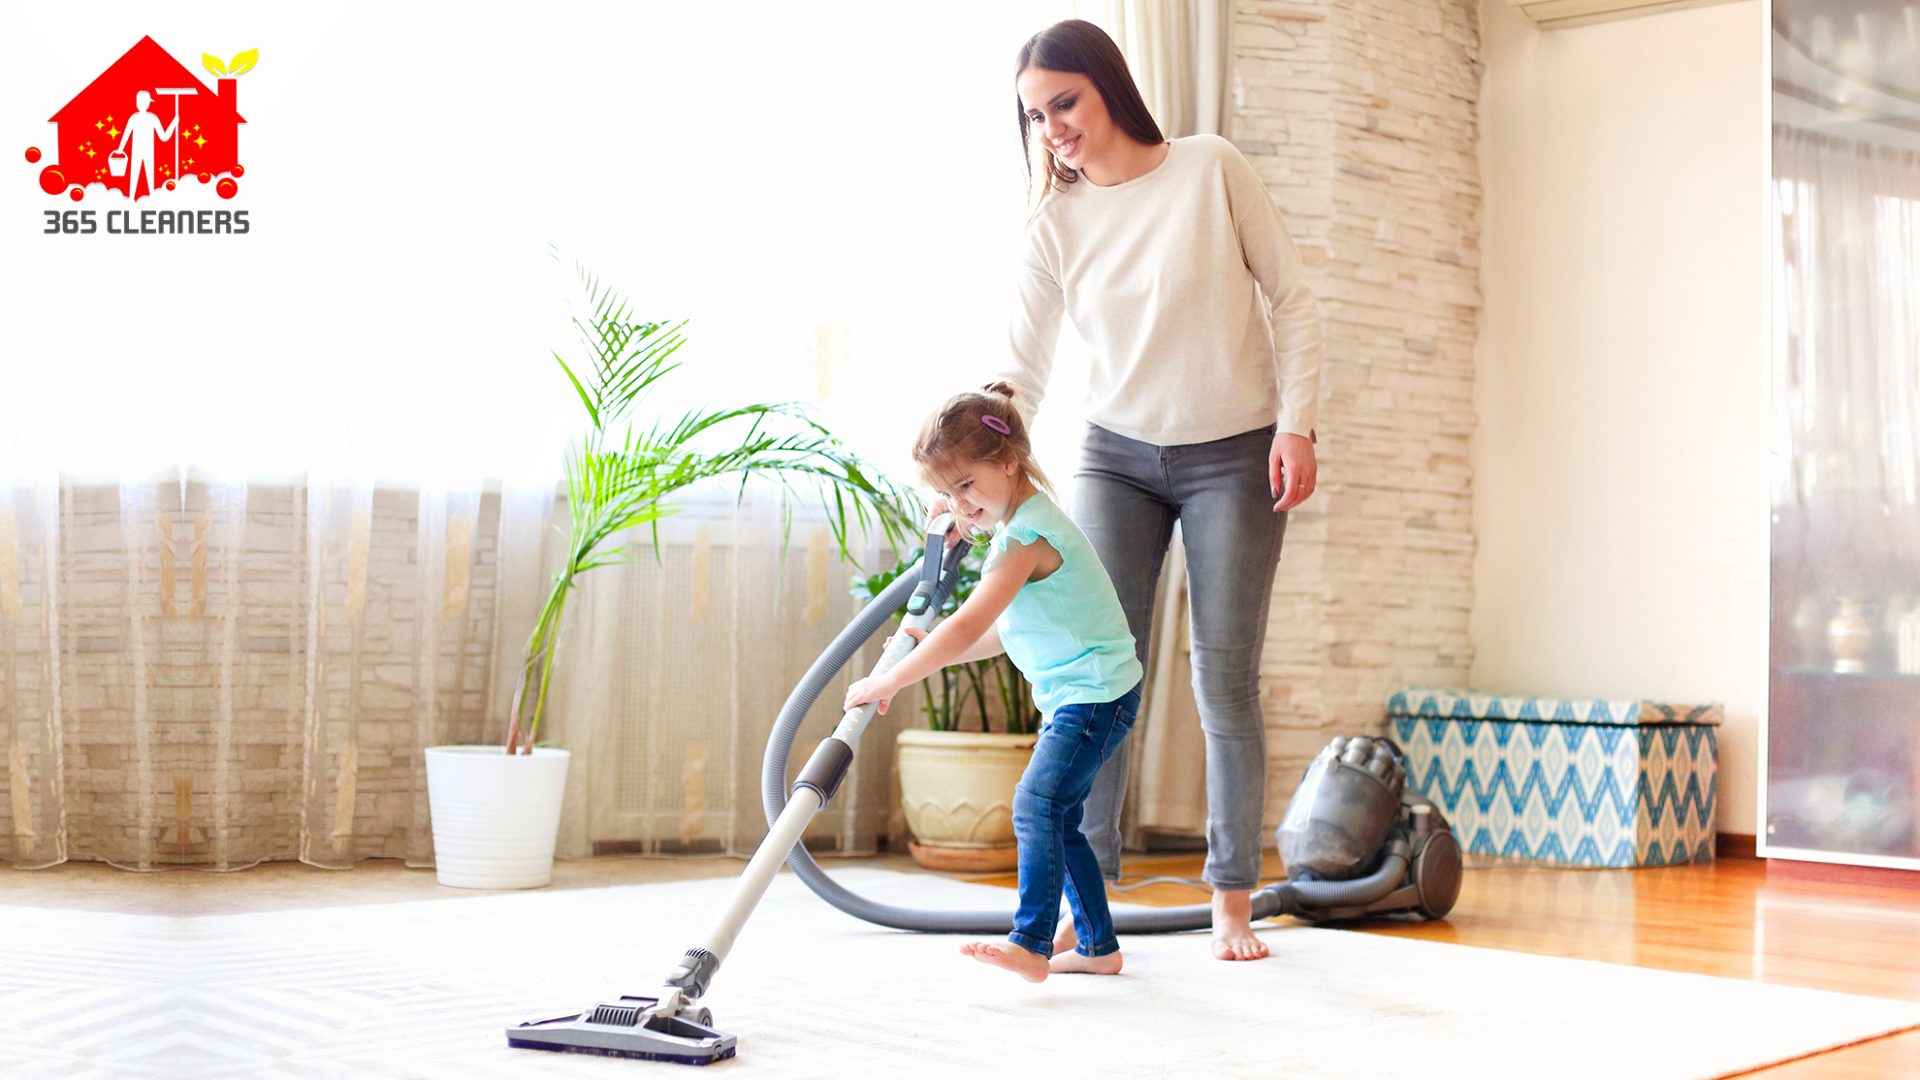 Carpet Cleaning in homes with Kids and Seniors